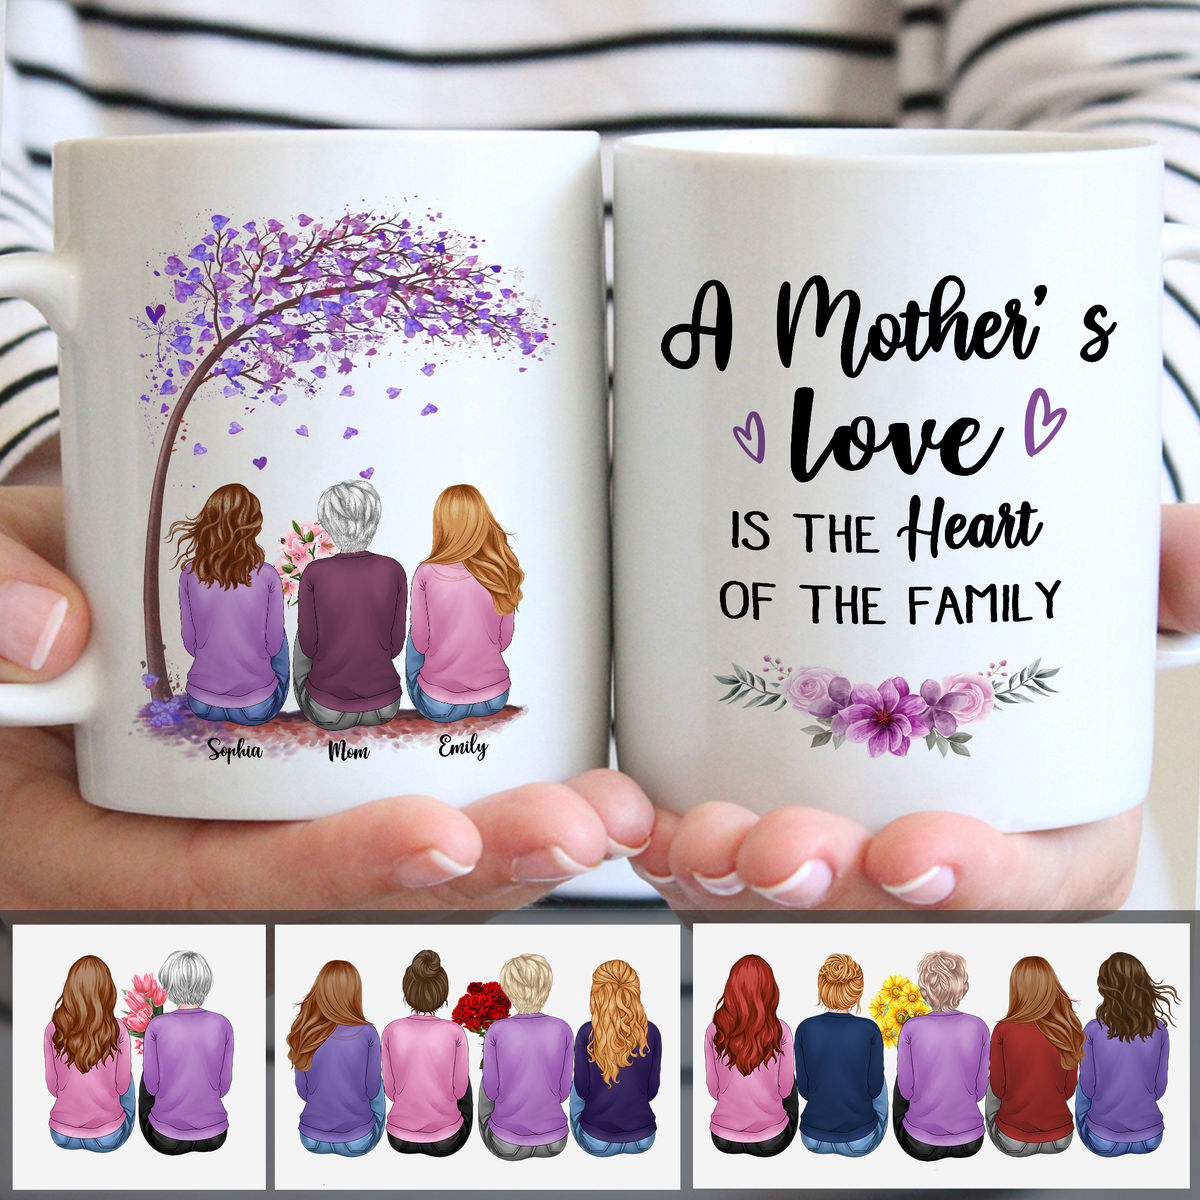 Personalized Mug - Mother & Daughter - A mother's love is the heart of the family (23809)